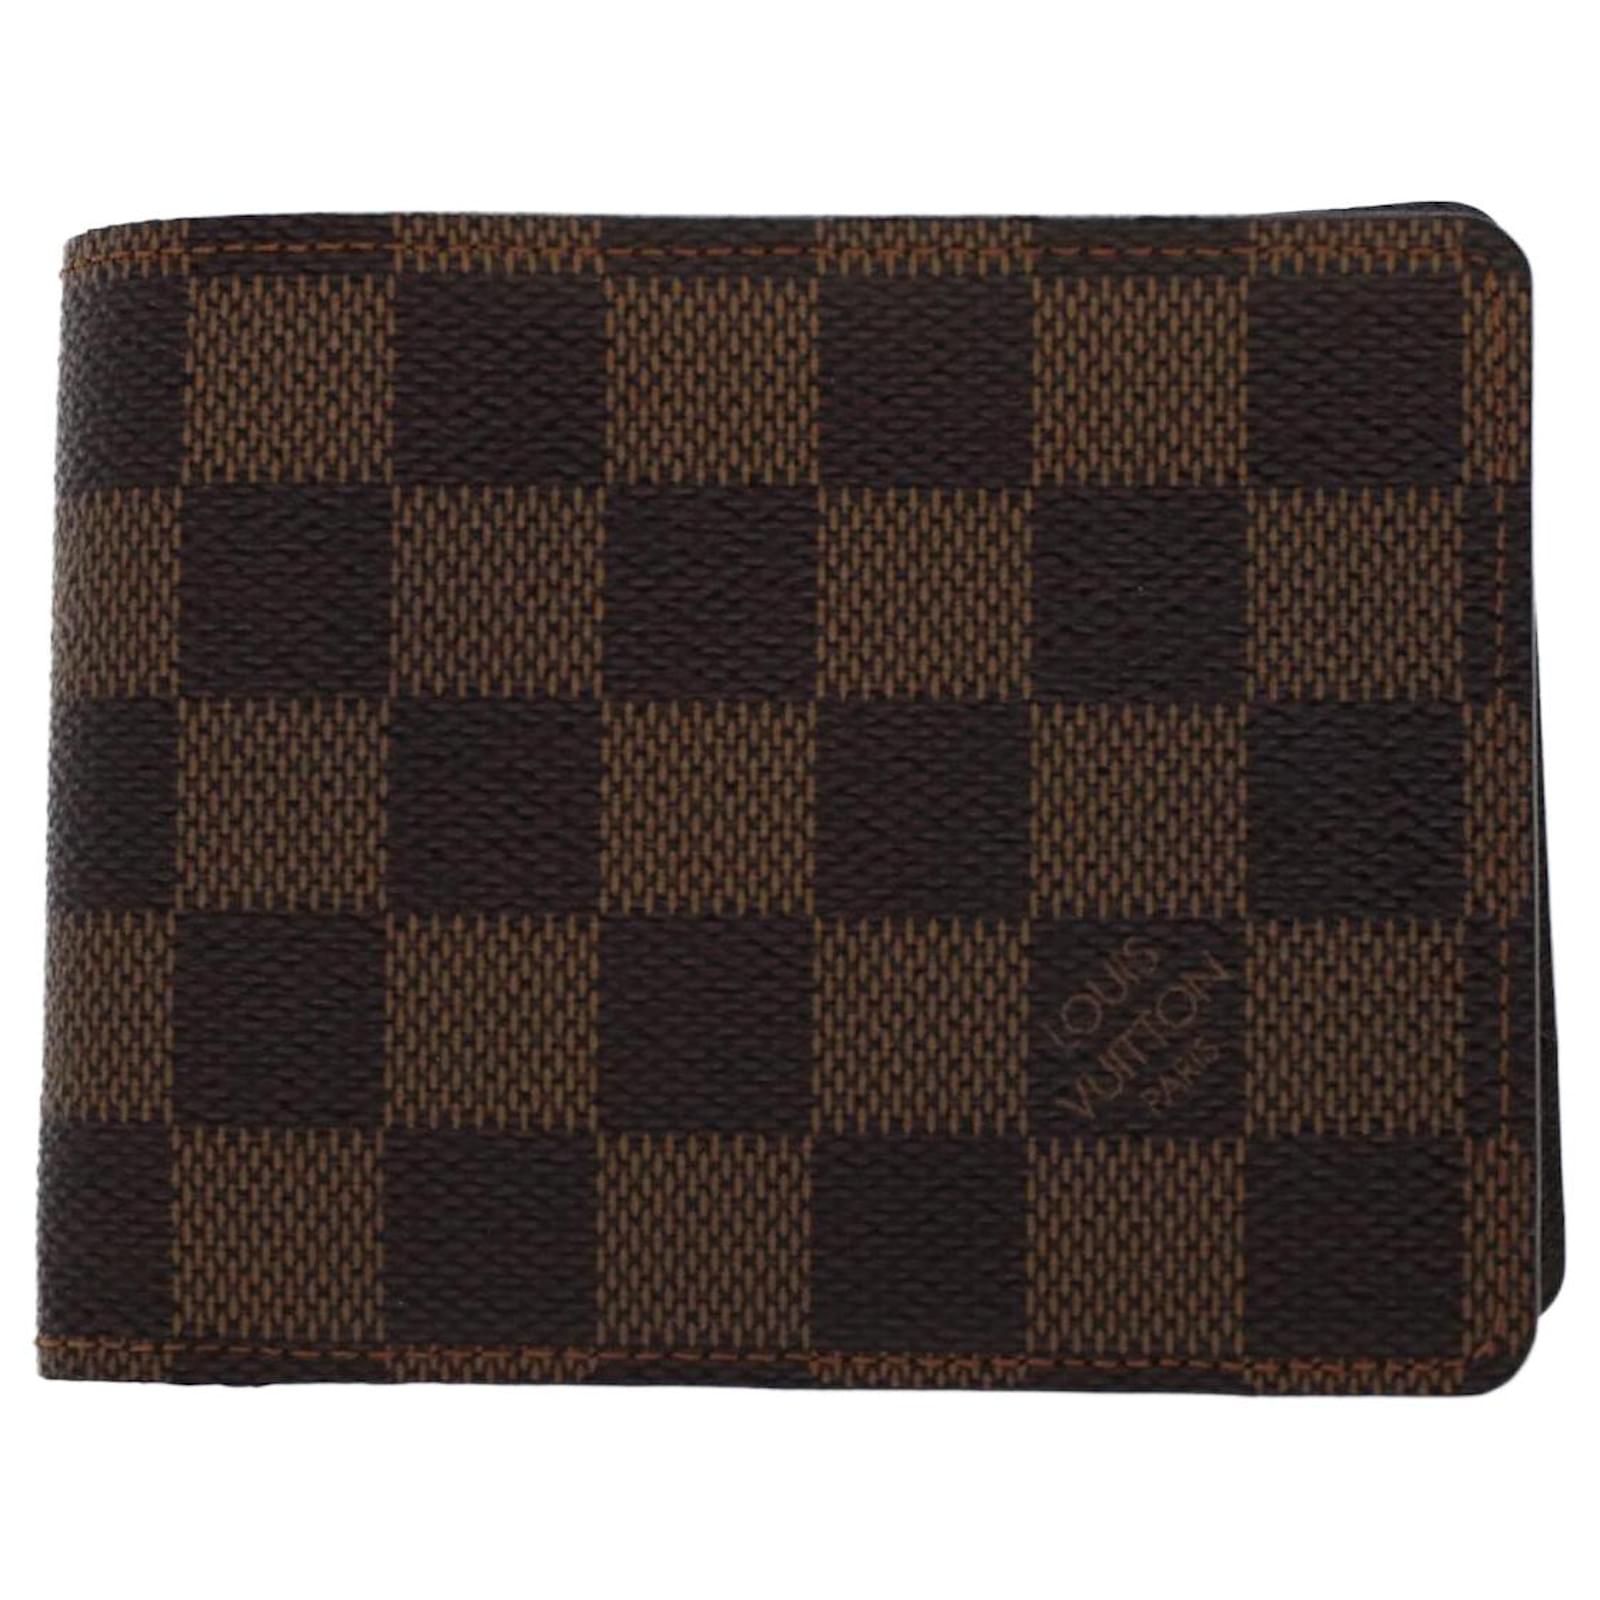 Where can we find date codes in LV wallets?, Louis Vuitton Sarah &  Multiple wallet